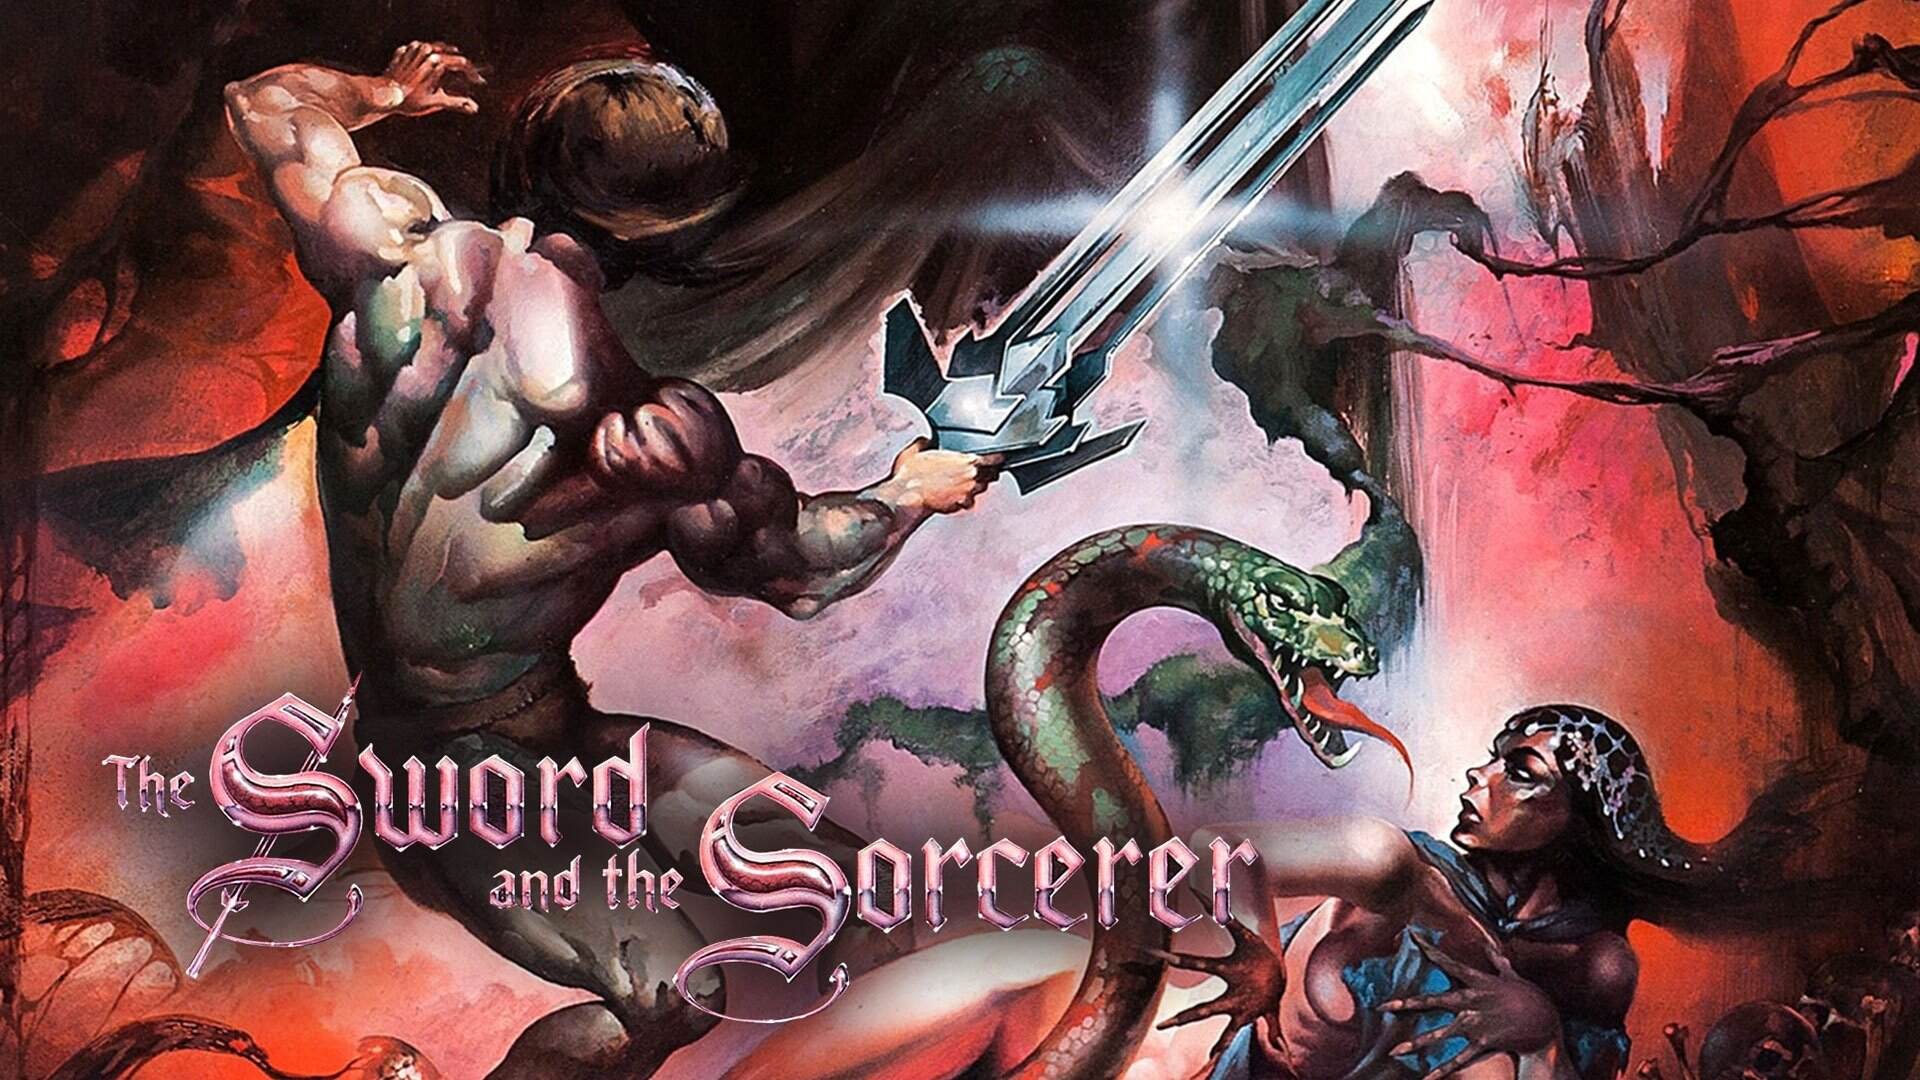 40-facts-about-the-movie-the-sword-and-the-sorcerer